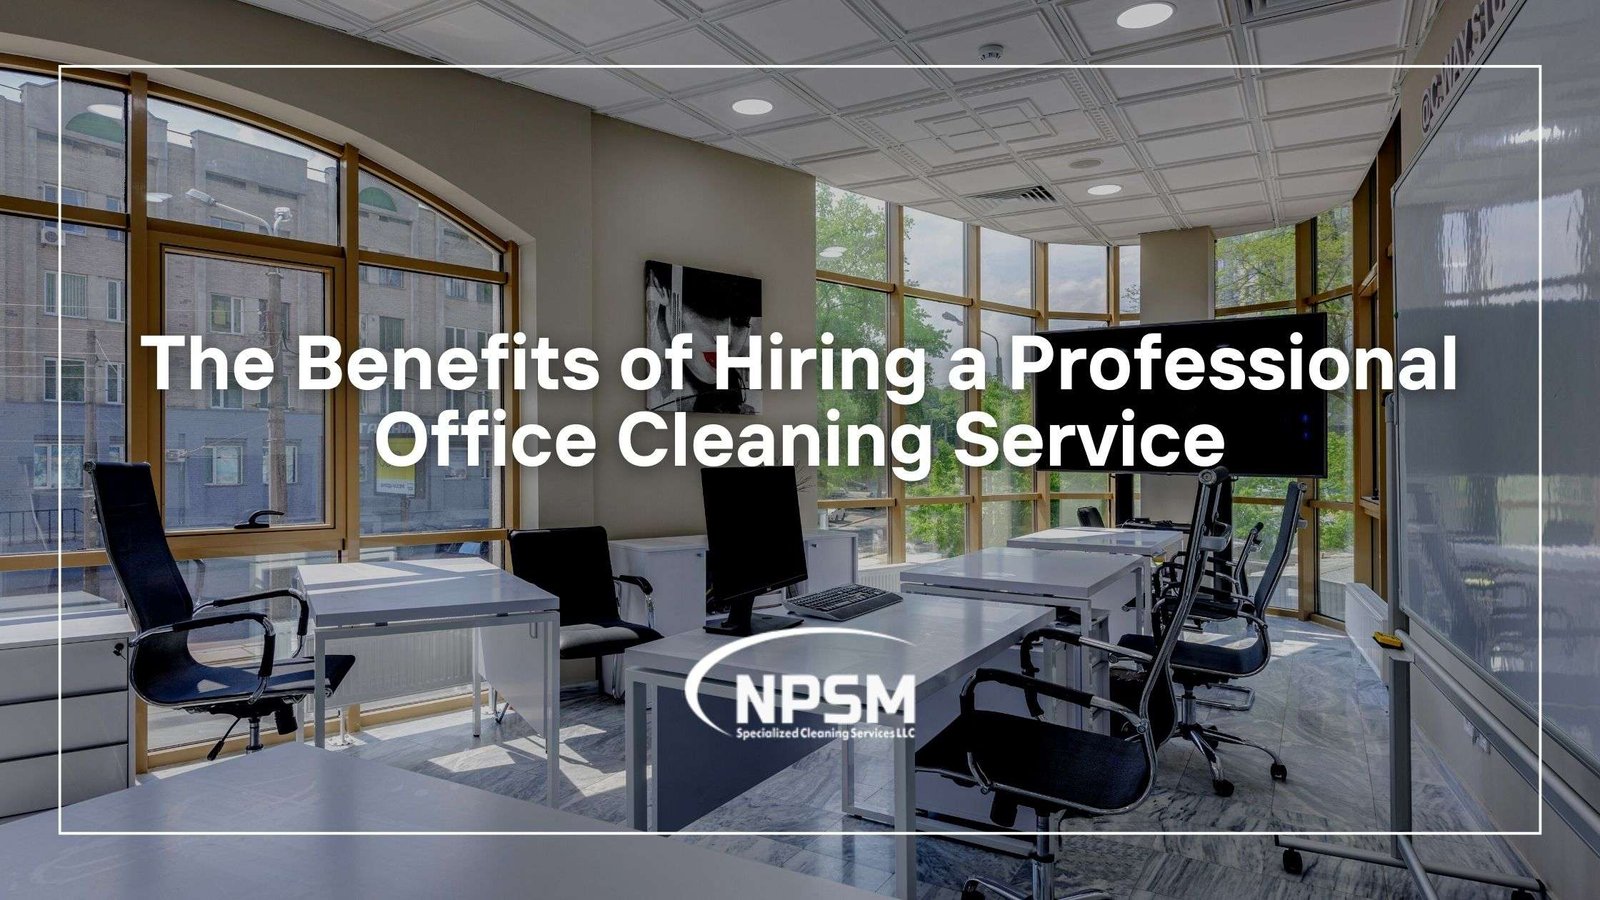 Hiring a Professional Office Cleaning Service benefits